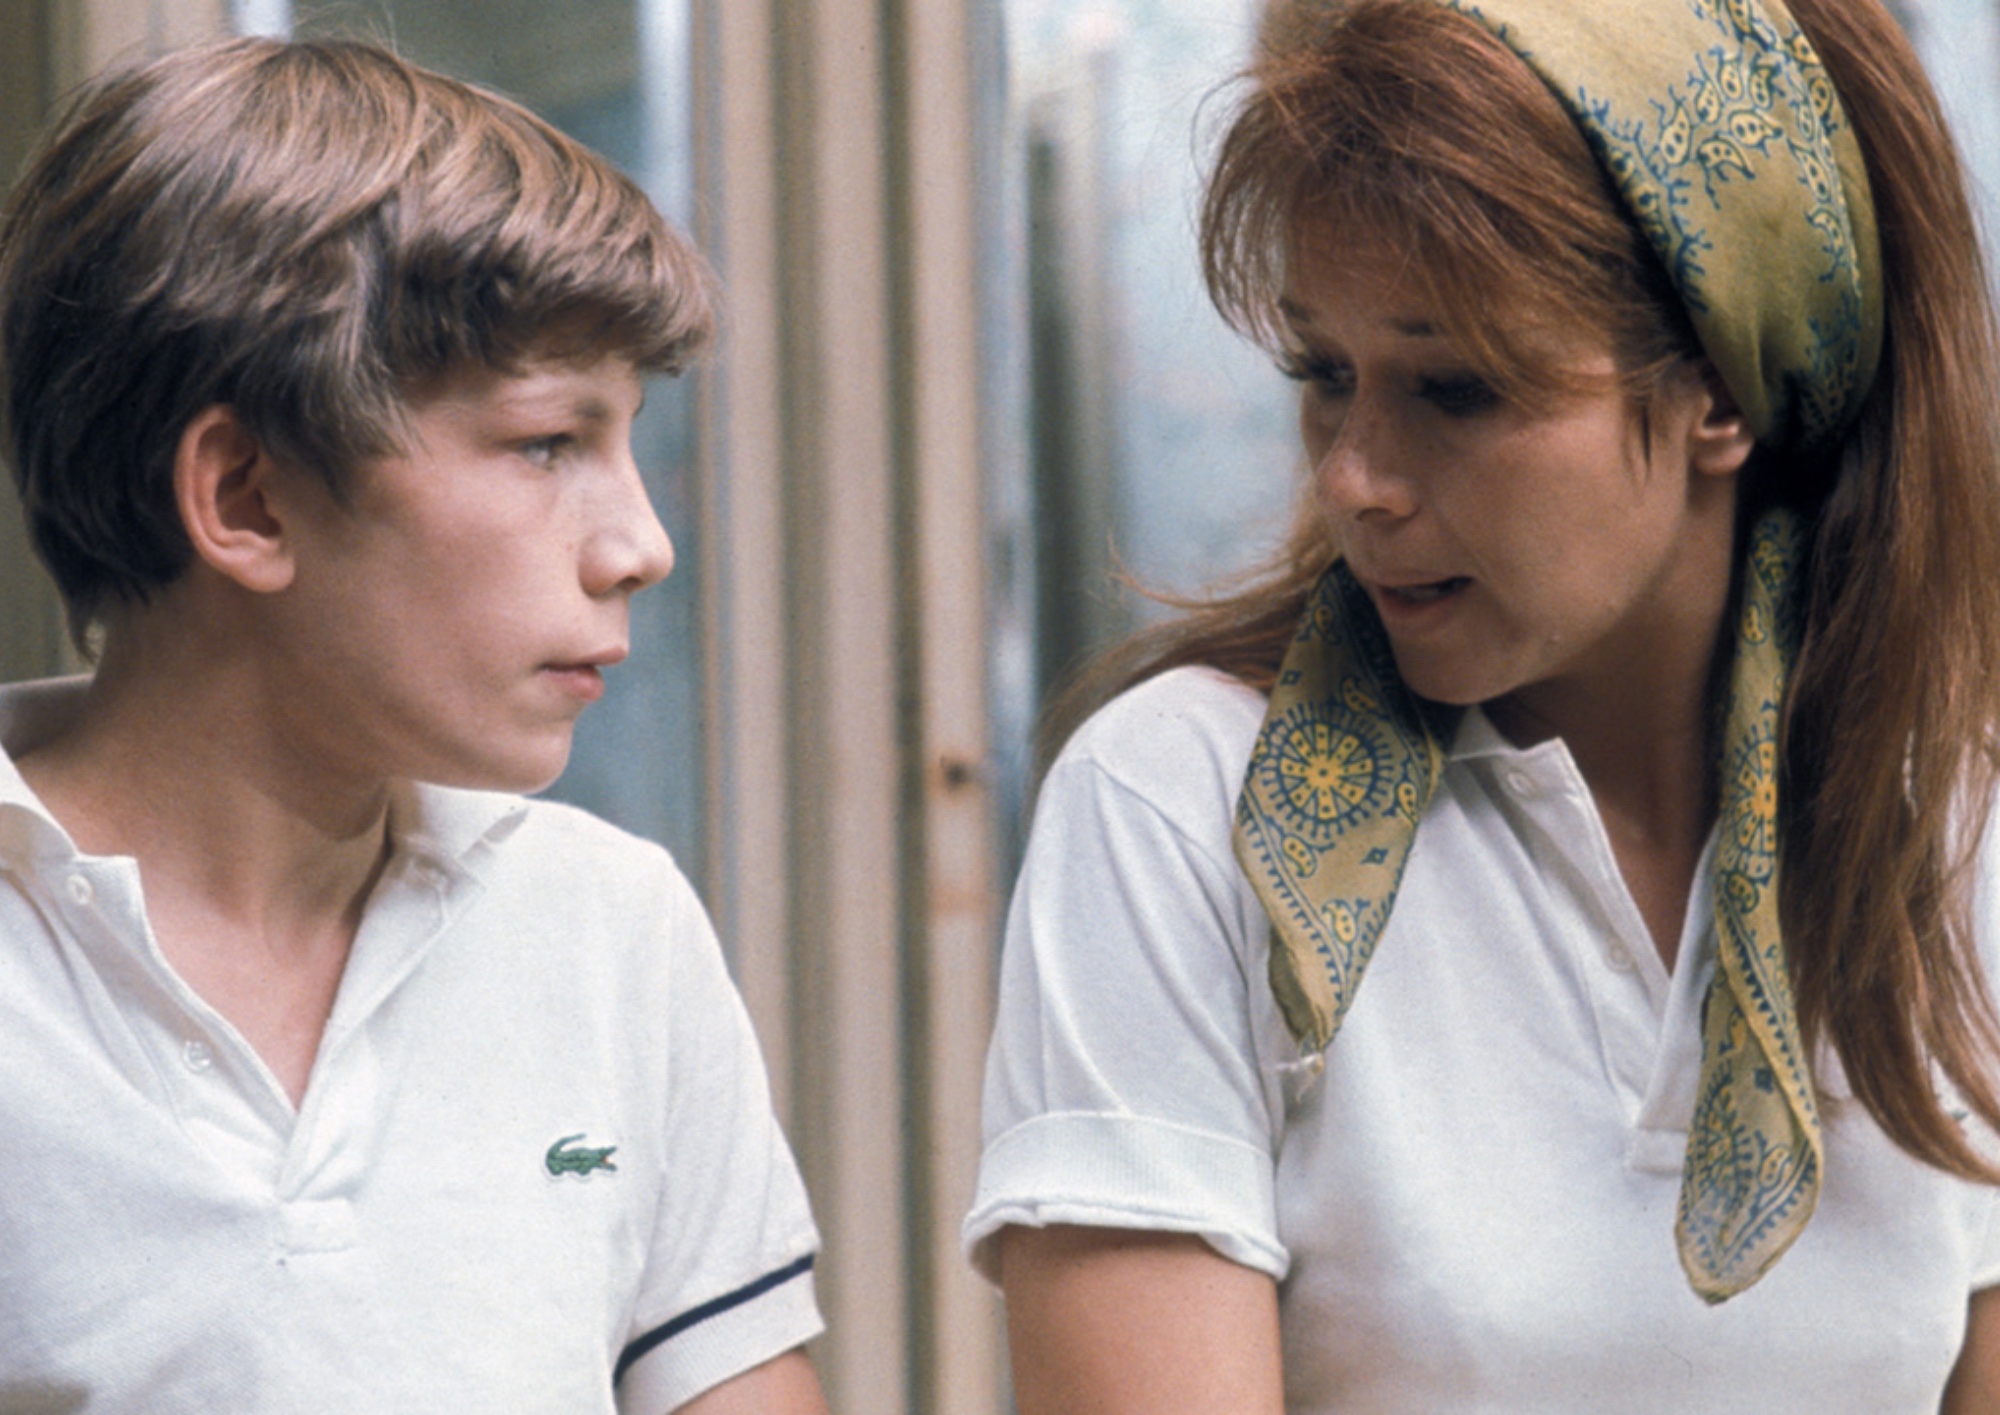 a woman with a white shirt and colorful hair scarf talks to a young boy with a white collared shirt